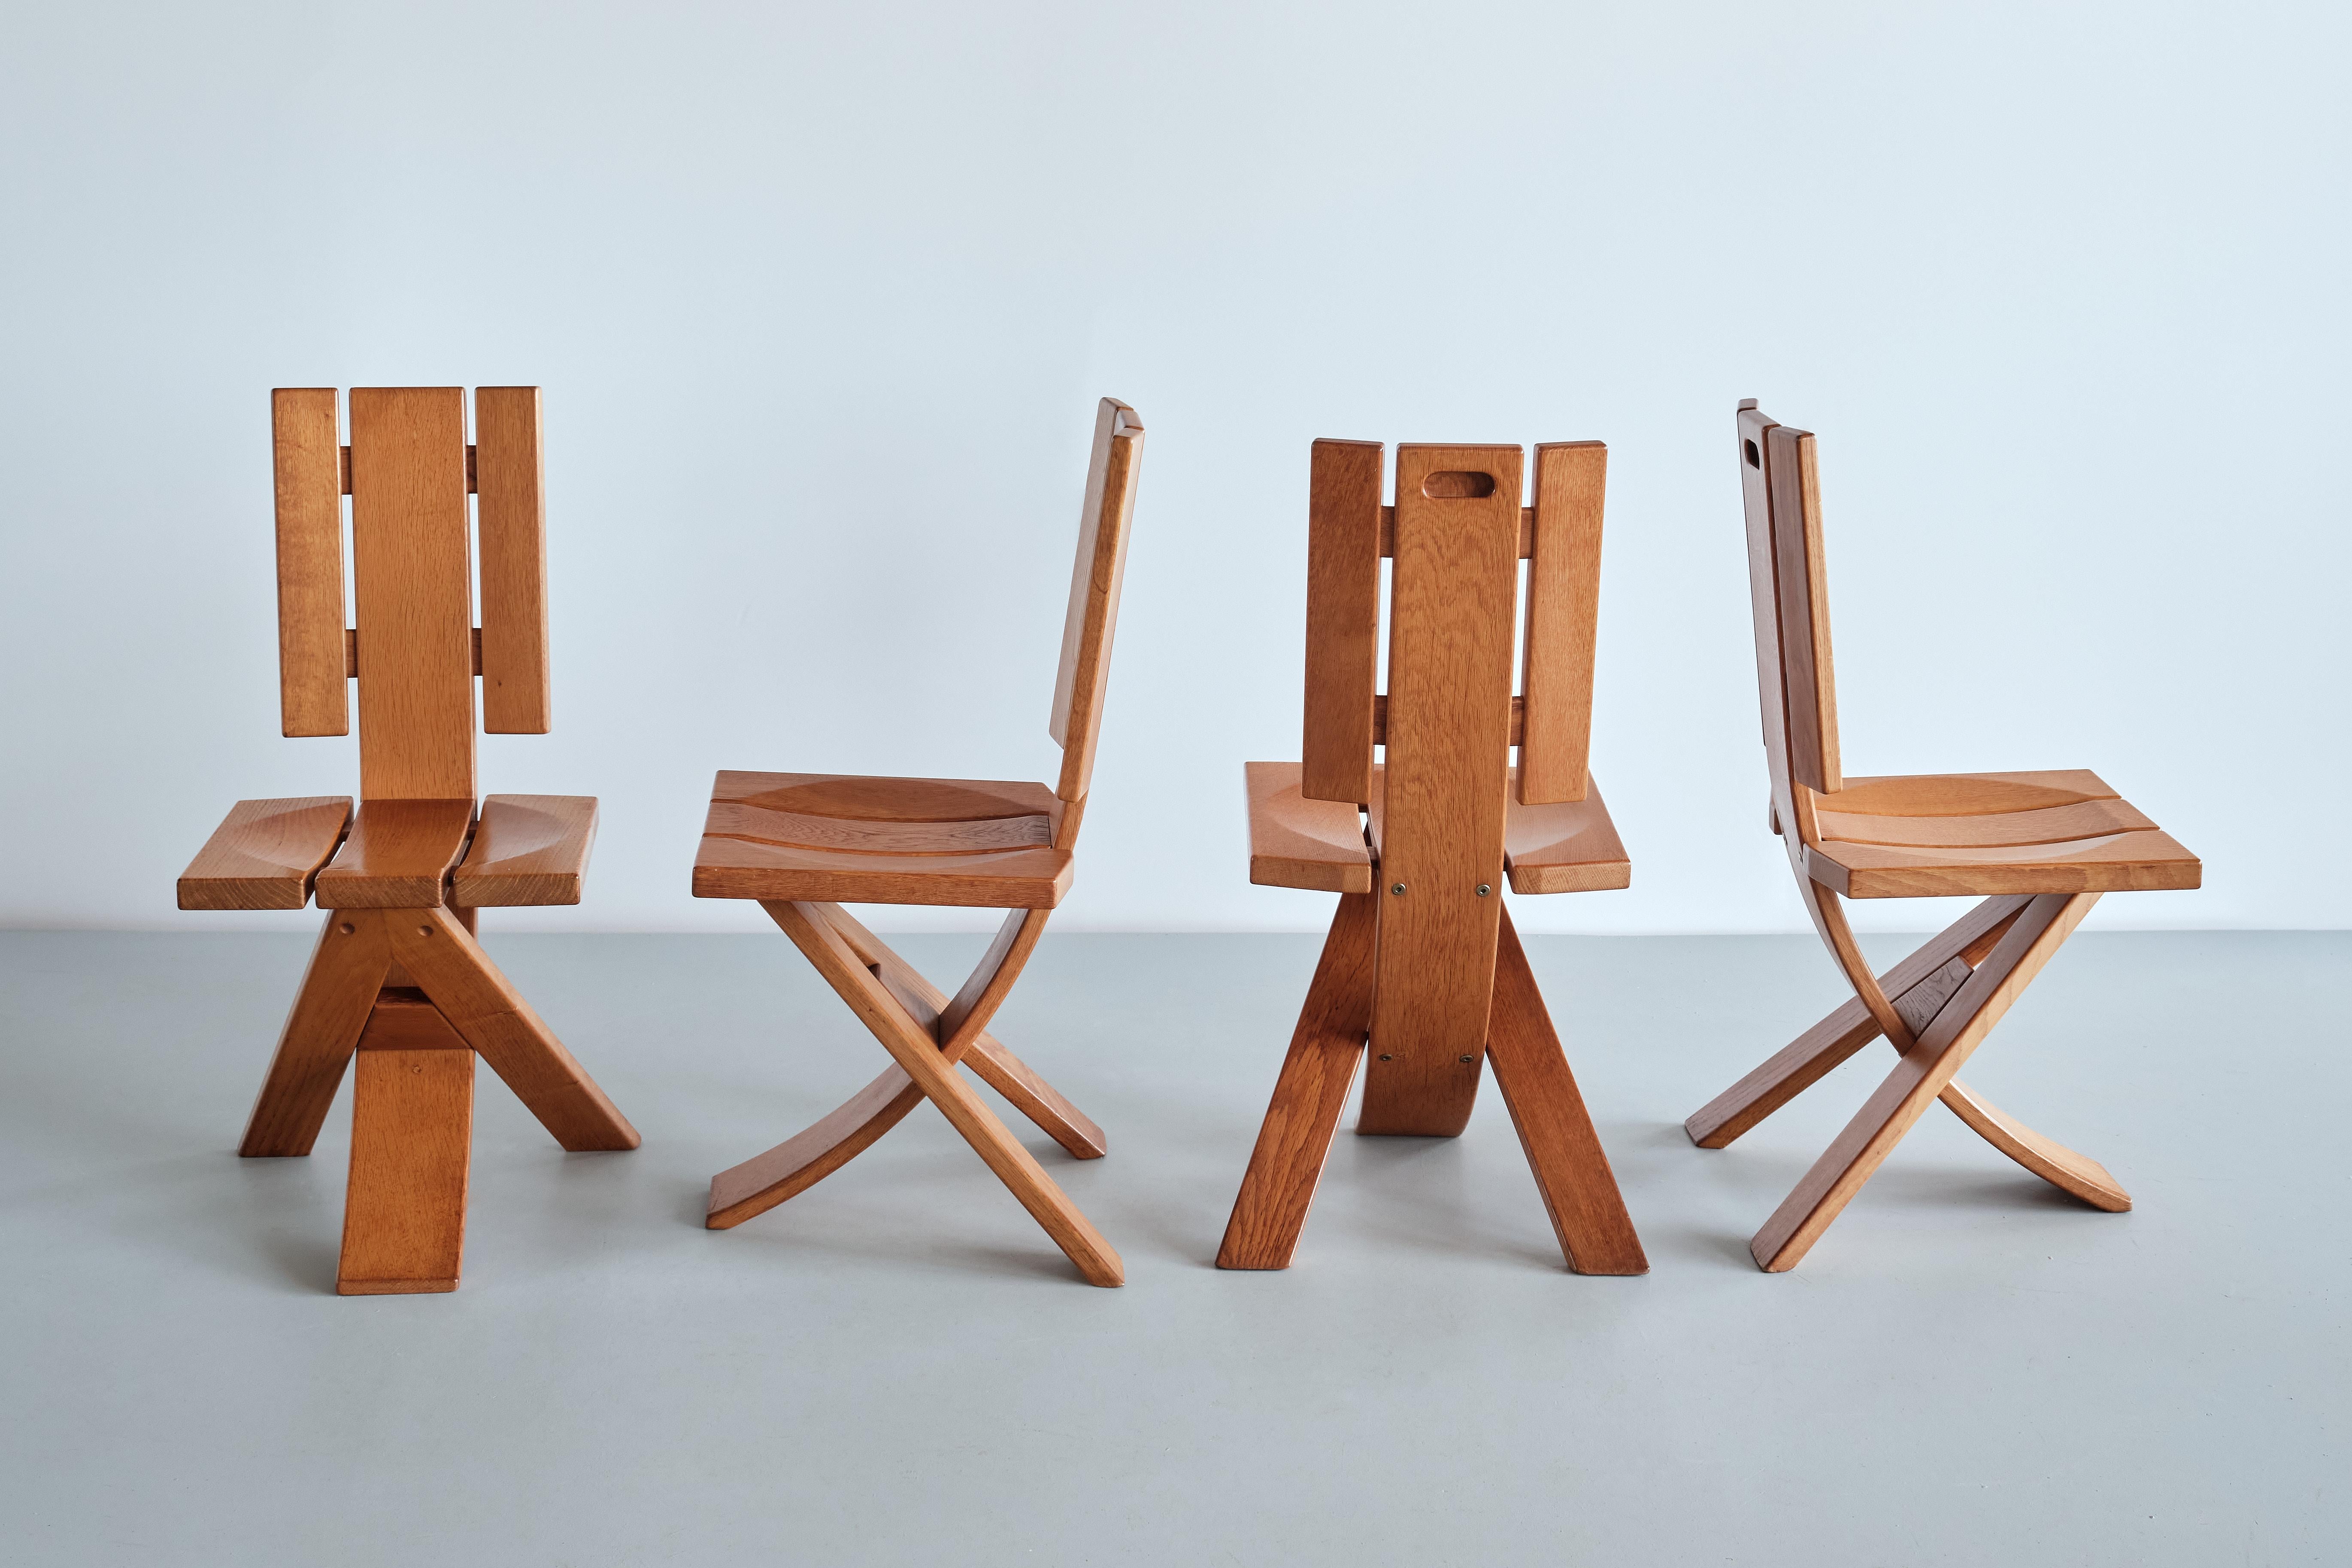 Sculptural Set of Four Ebénisterie Seltz Dining Chairs in Oak, France, 1970s For Sale 4